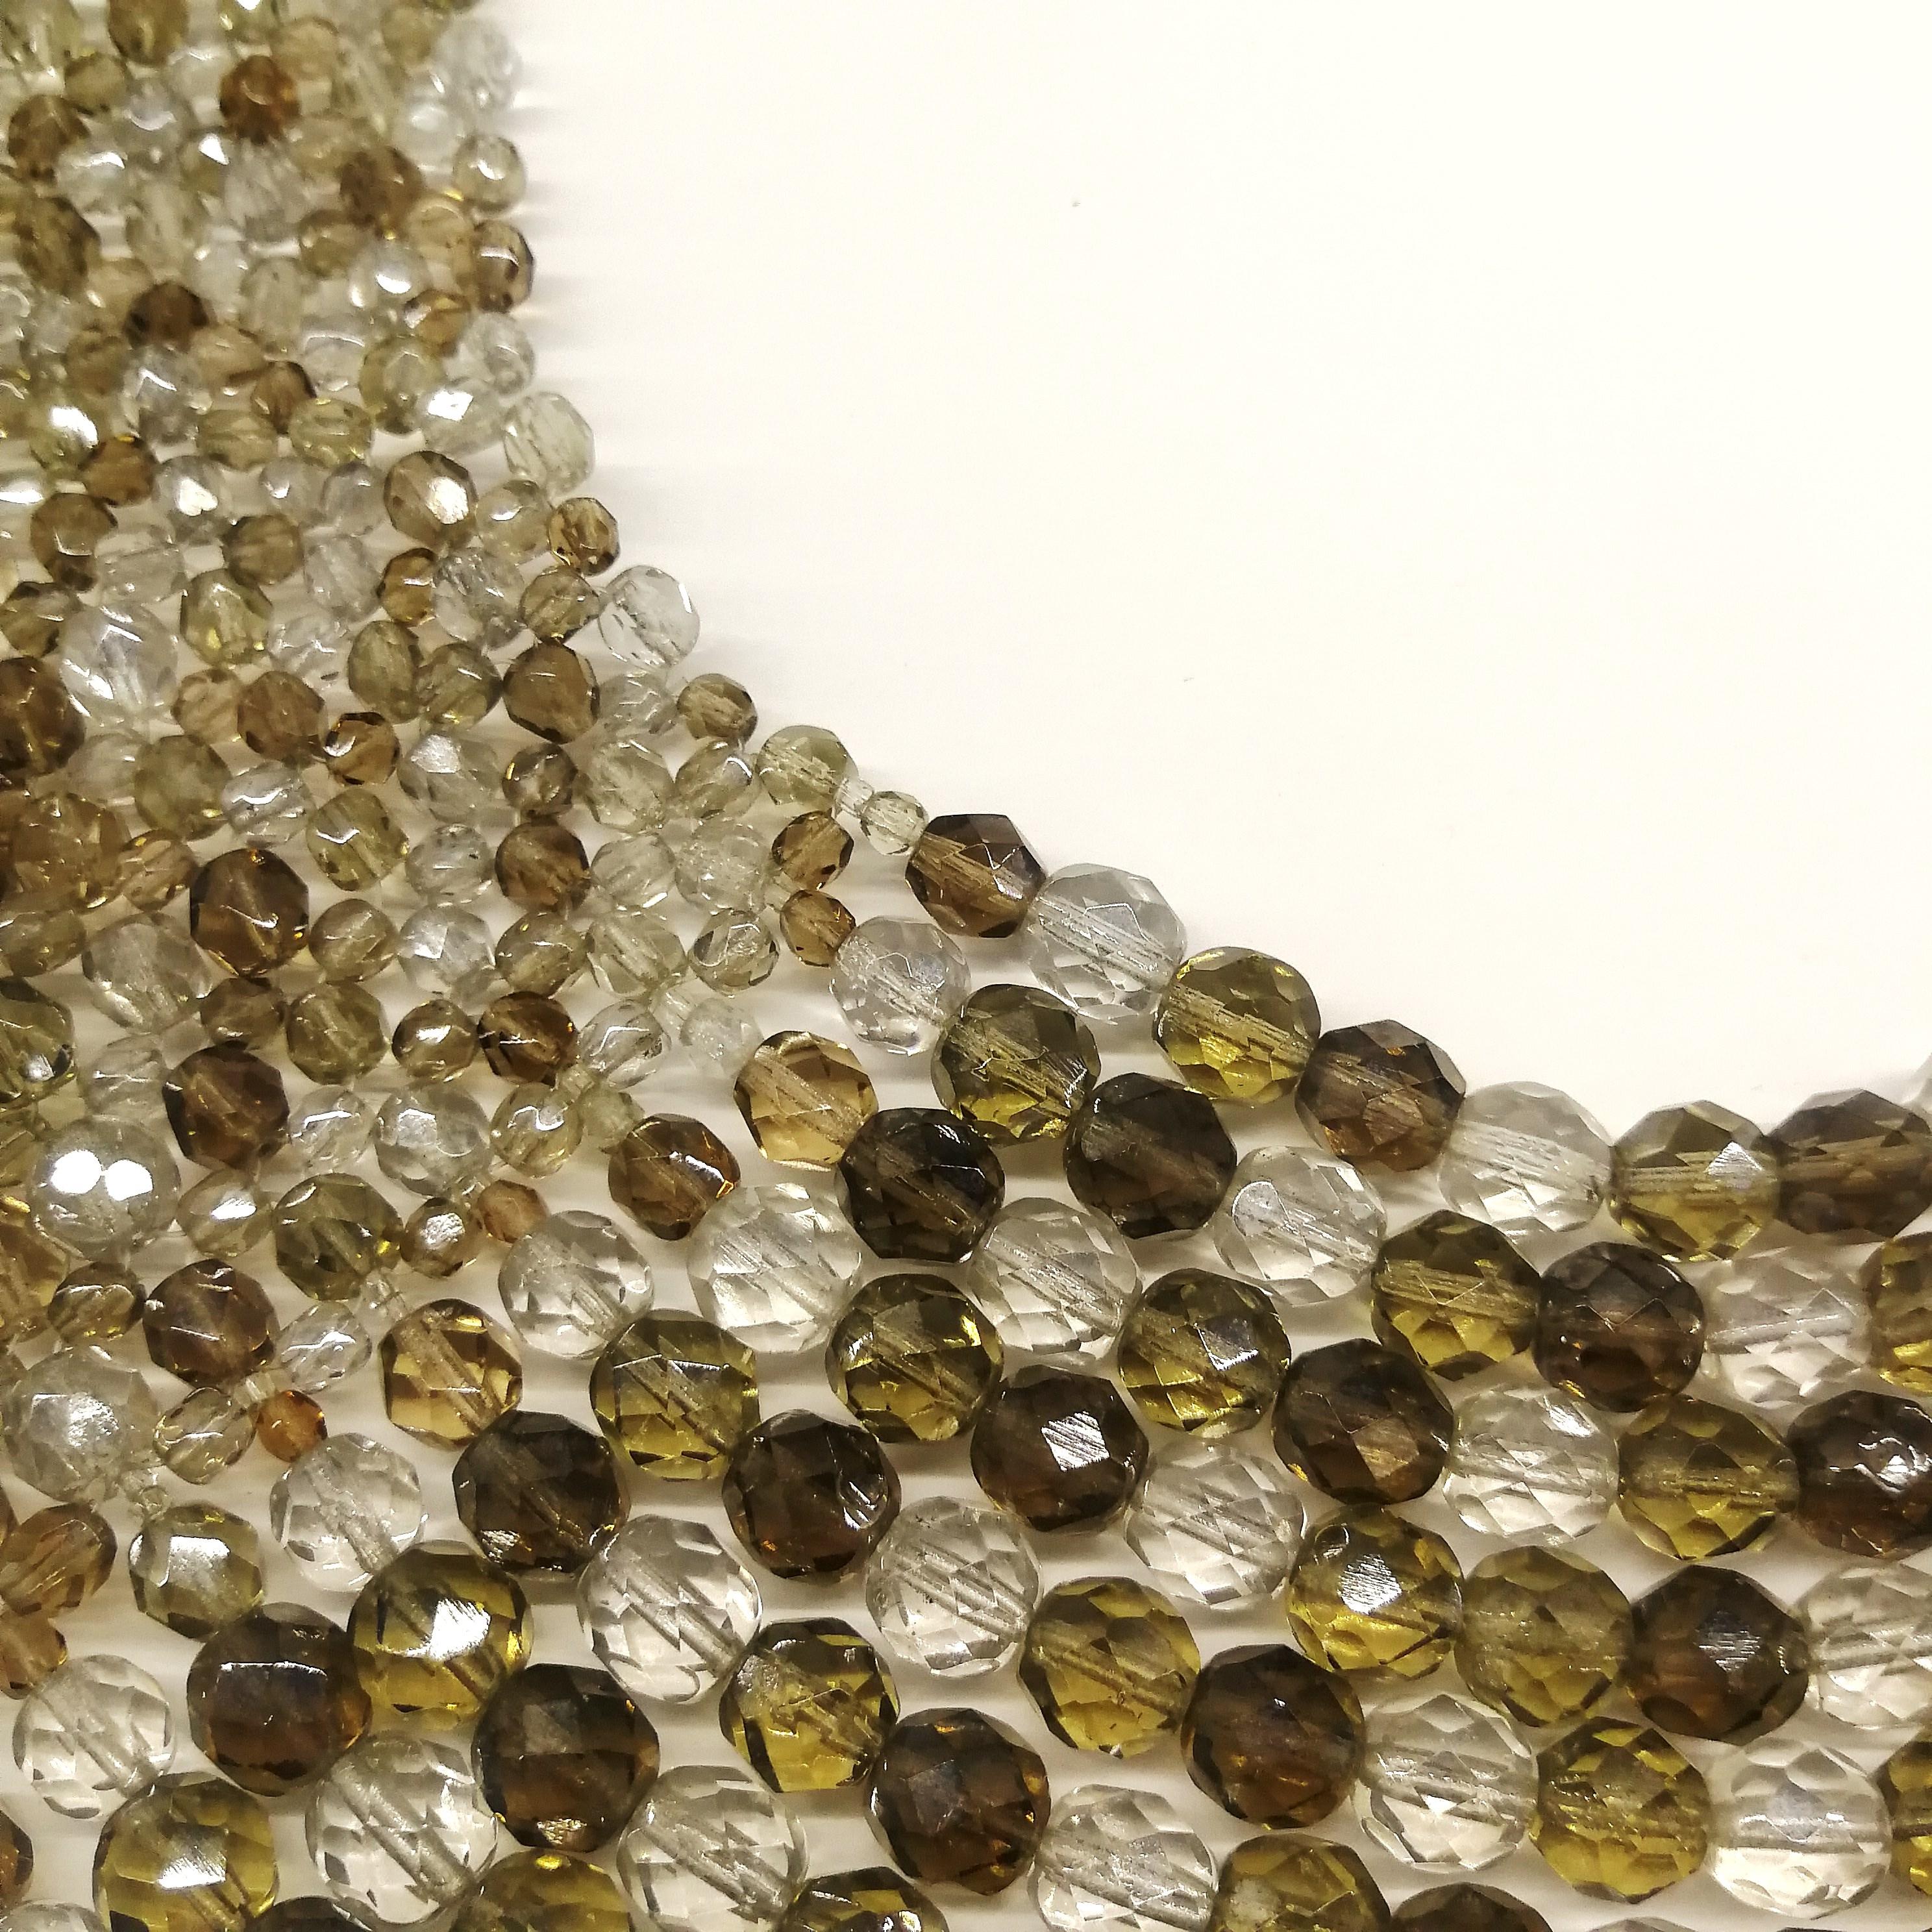 Smokey quartz, taupe and clear glass bead collar, Coppola e Toppo, early 1960s. 5